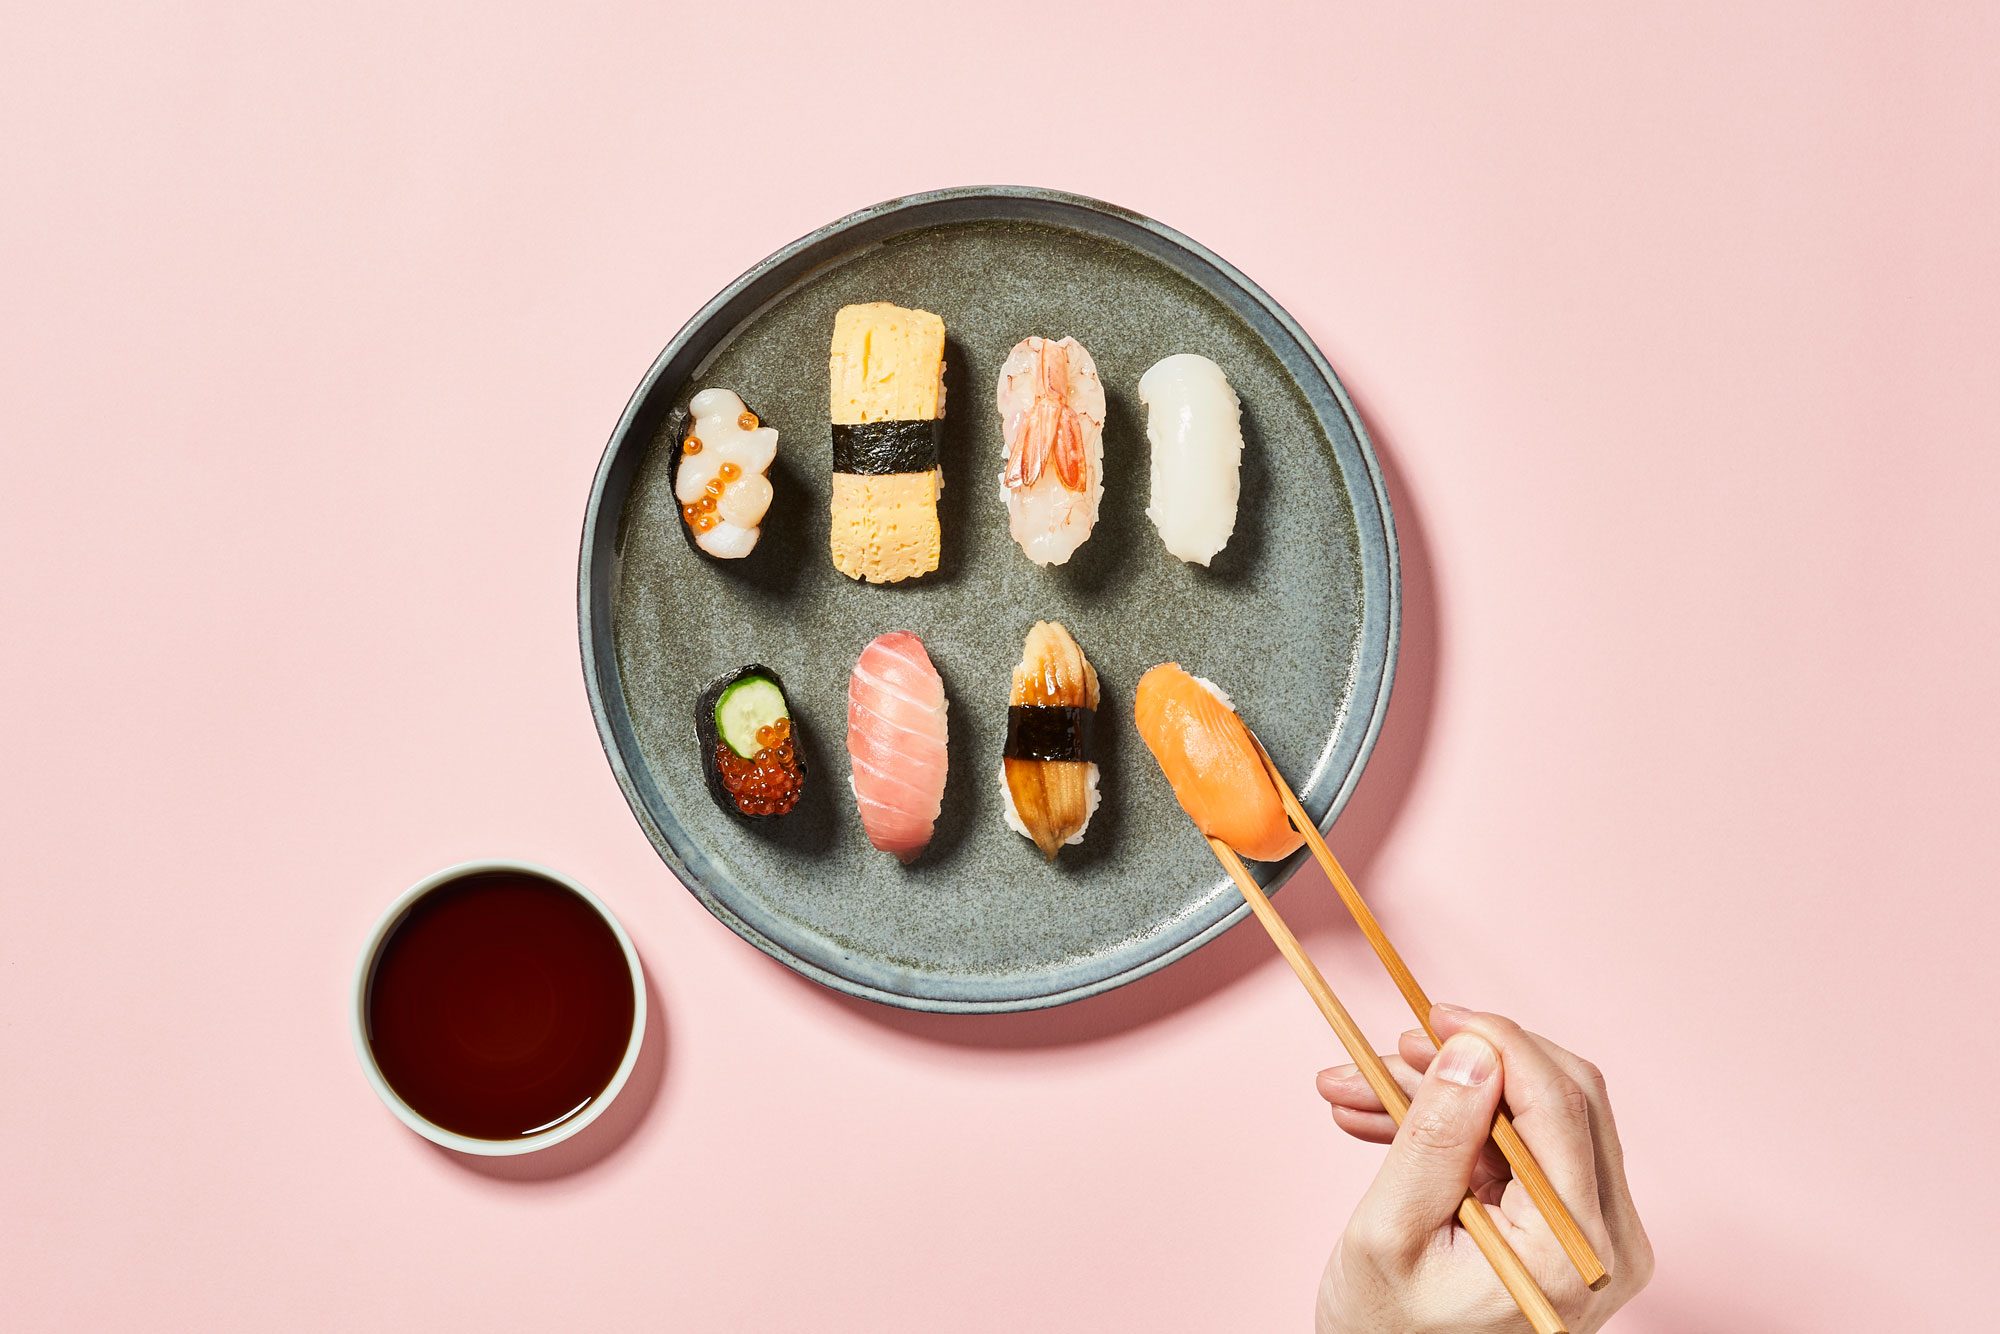 round plate with sushi pieces on pink background. a hand with chopsticks holds a piece of sushi. soy sauce dish nearby